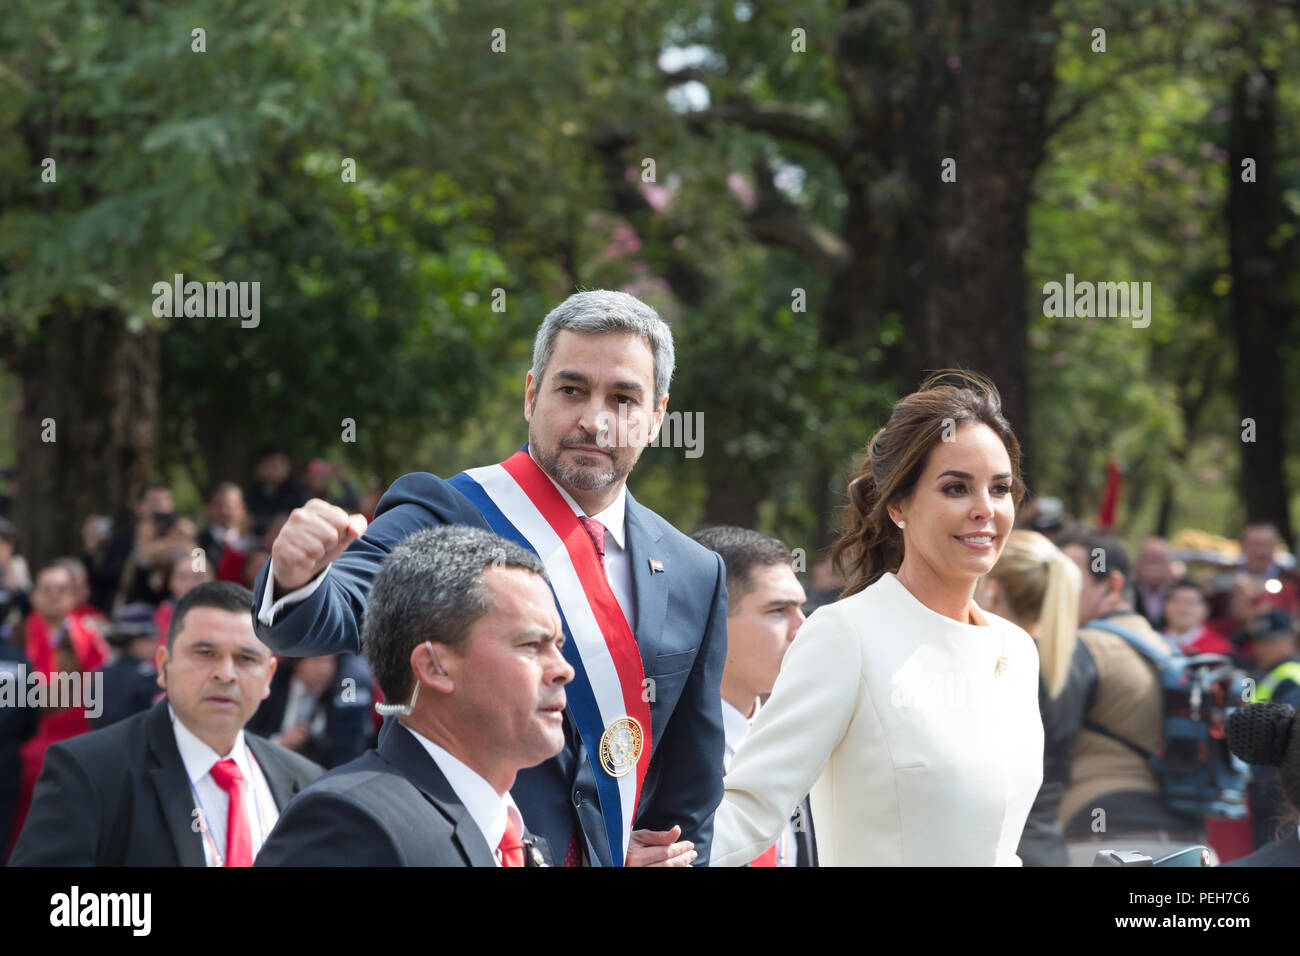 Asuncion, Paraguay. 15th Aug, 2018. Paraguay's new President Mario Abdo Benítez gestures to members of the public as he rides in a convertible car beside his wife Silvana López Moreira, after leaving the Palace of Lopez towards the Metropolitan Cathedral in Asuncion, Paraguay. Credit: Andre M. Chang/ARDUOPRESS/Alamy Live News Stock Photo